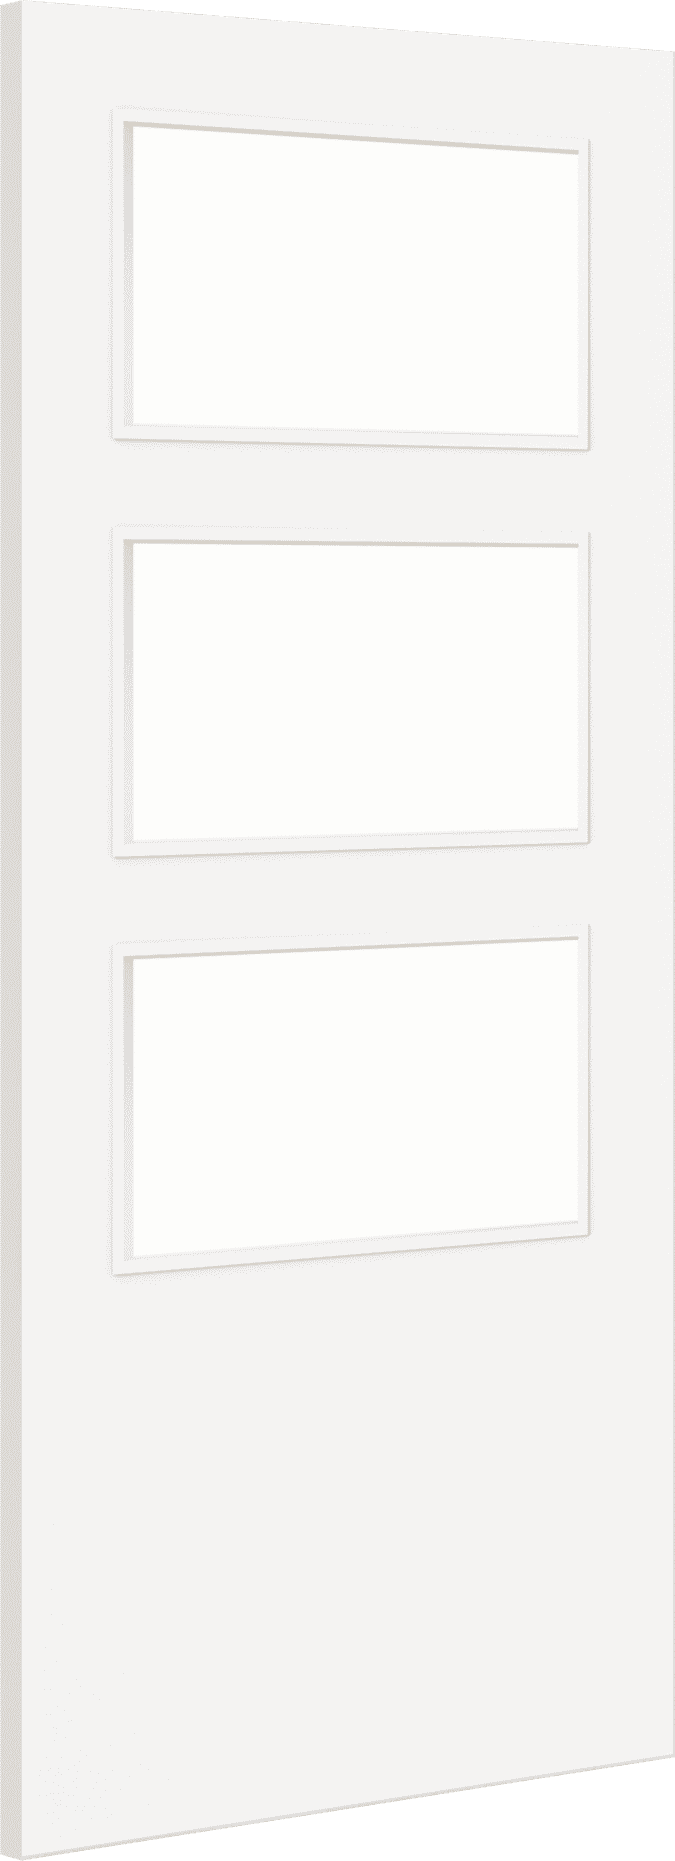 1981mm x 533mm x 44mm (21") Architectural Paint Grade White 03 Frosted Glazed Fire Door Blank